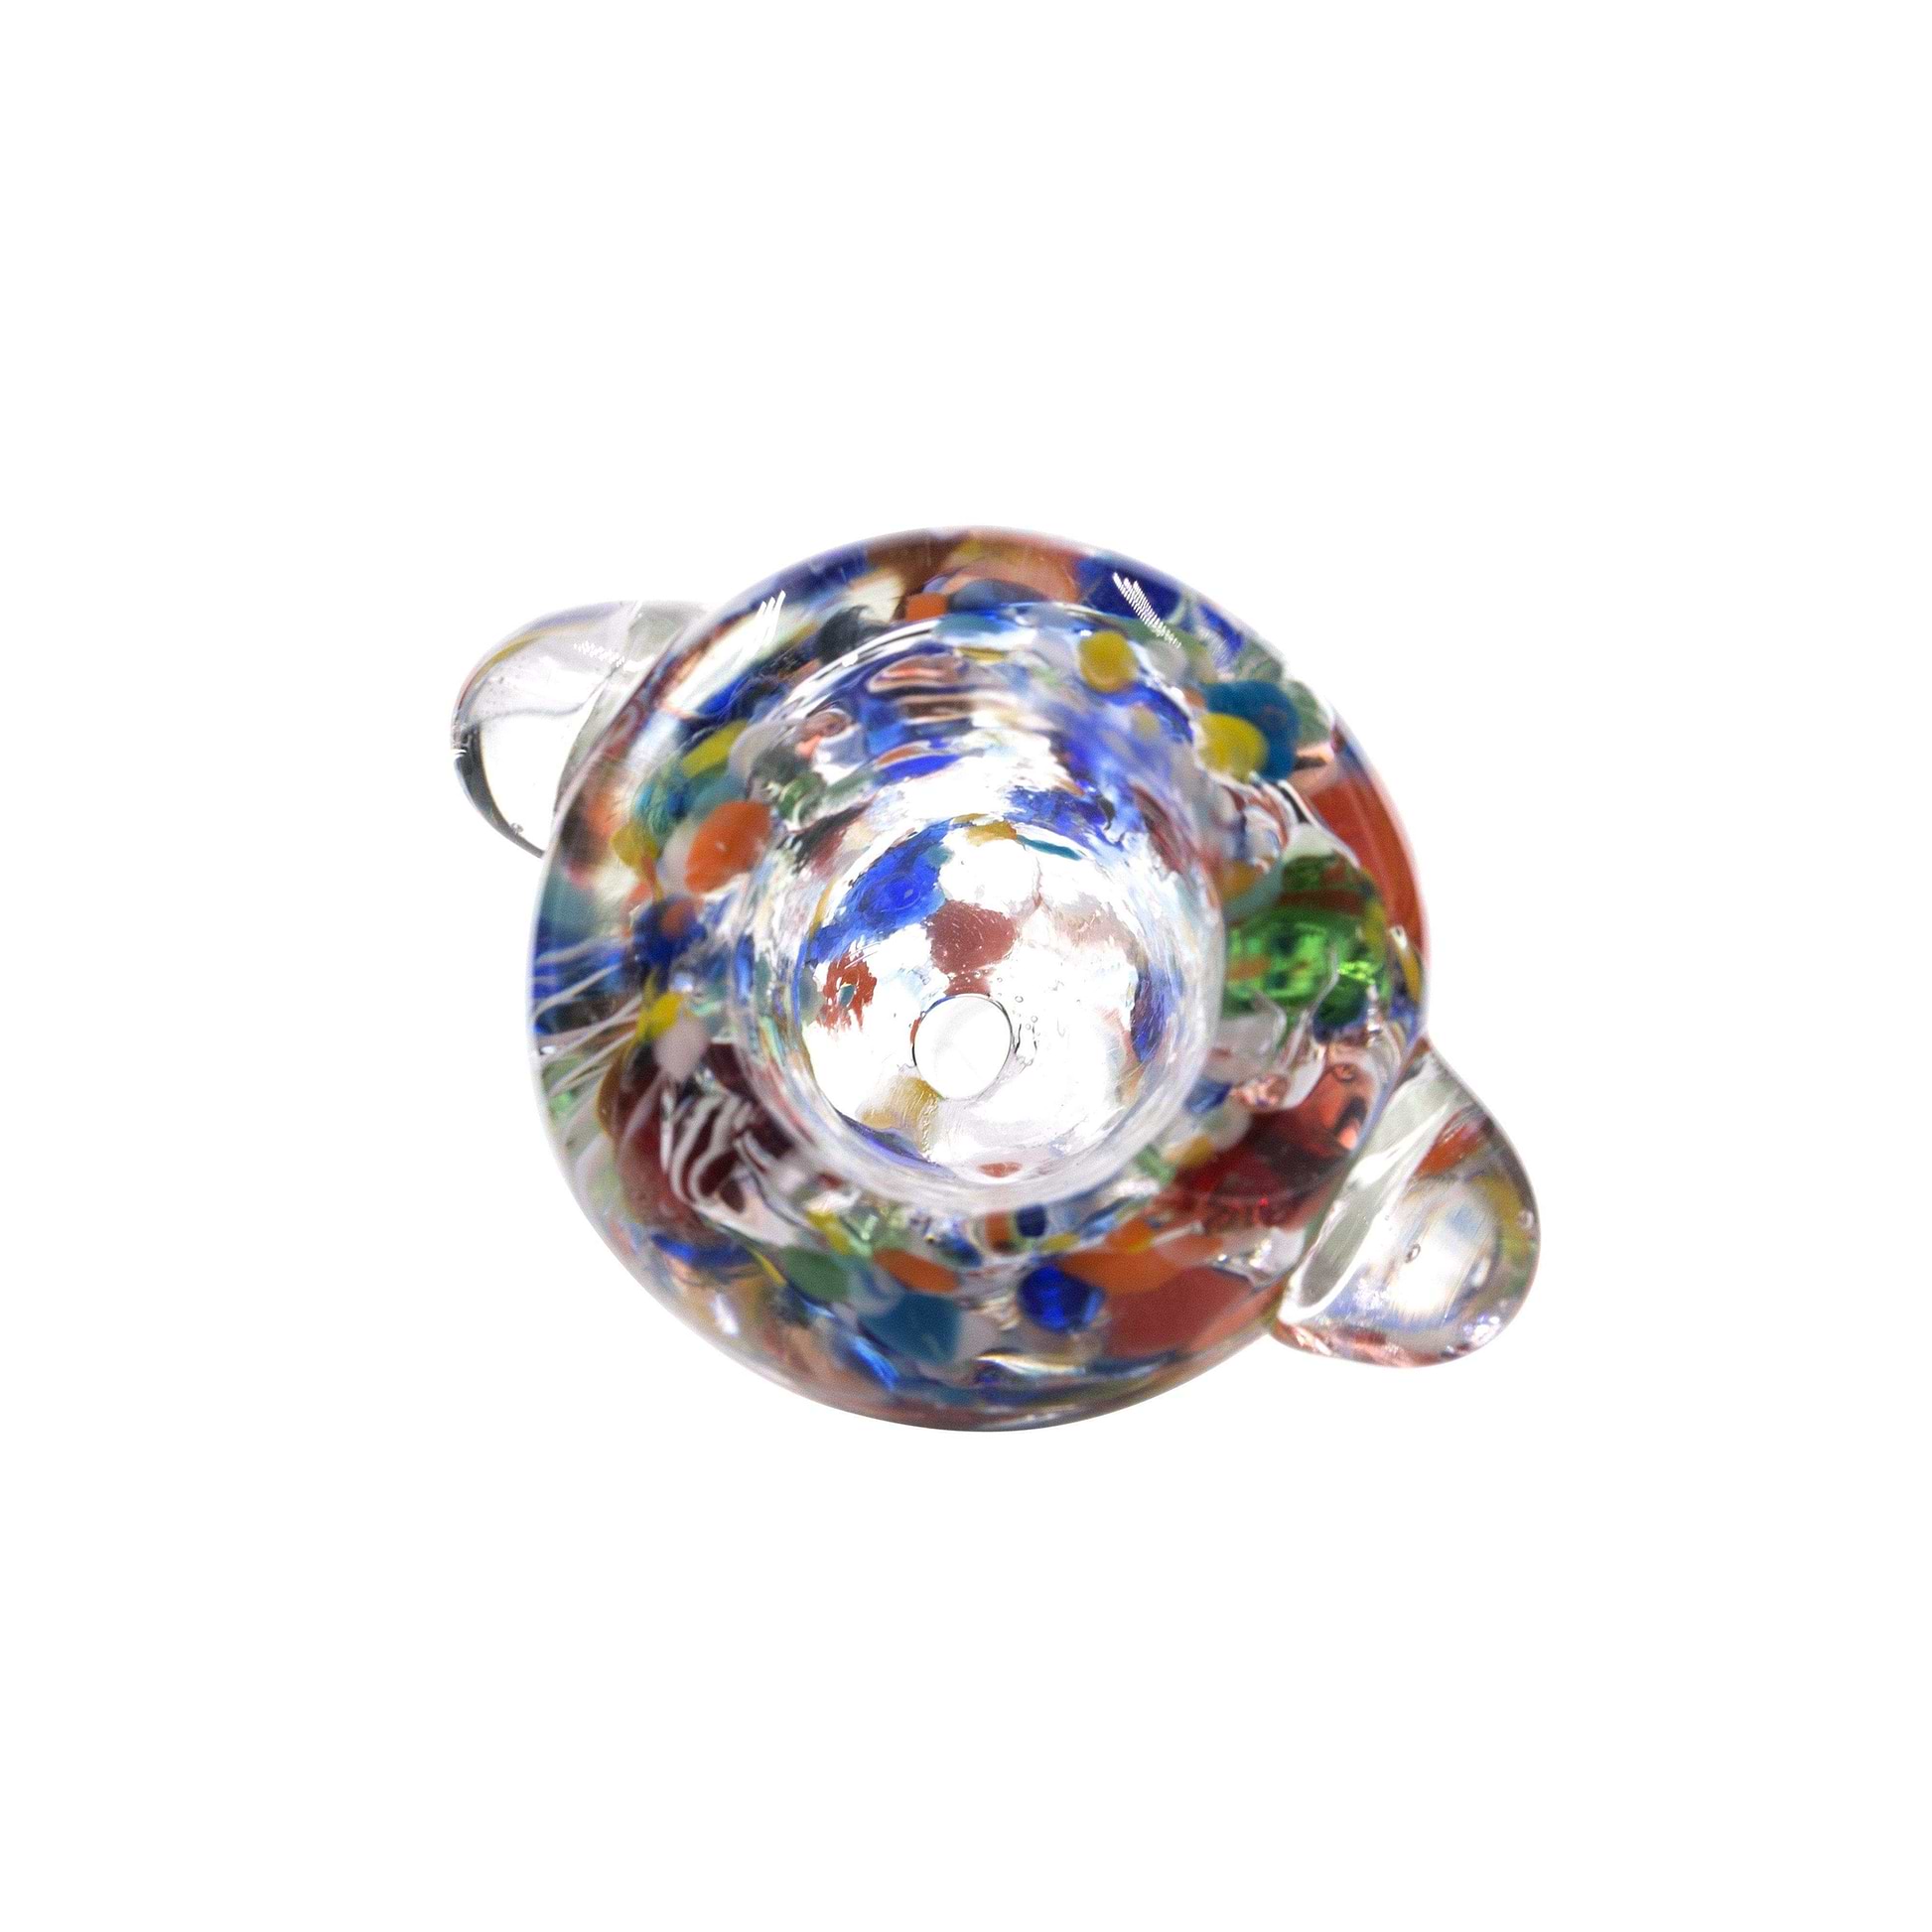 Stylish carb bong bowl smoking device for bongs with rainbow swirls design and finger grips classic shape